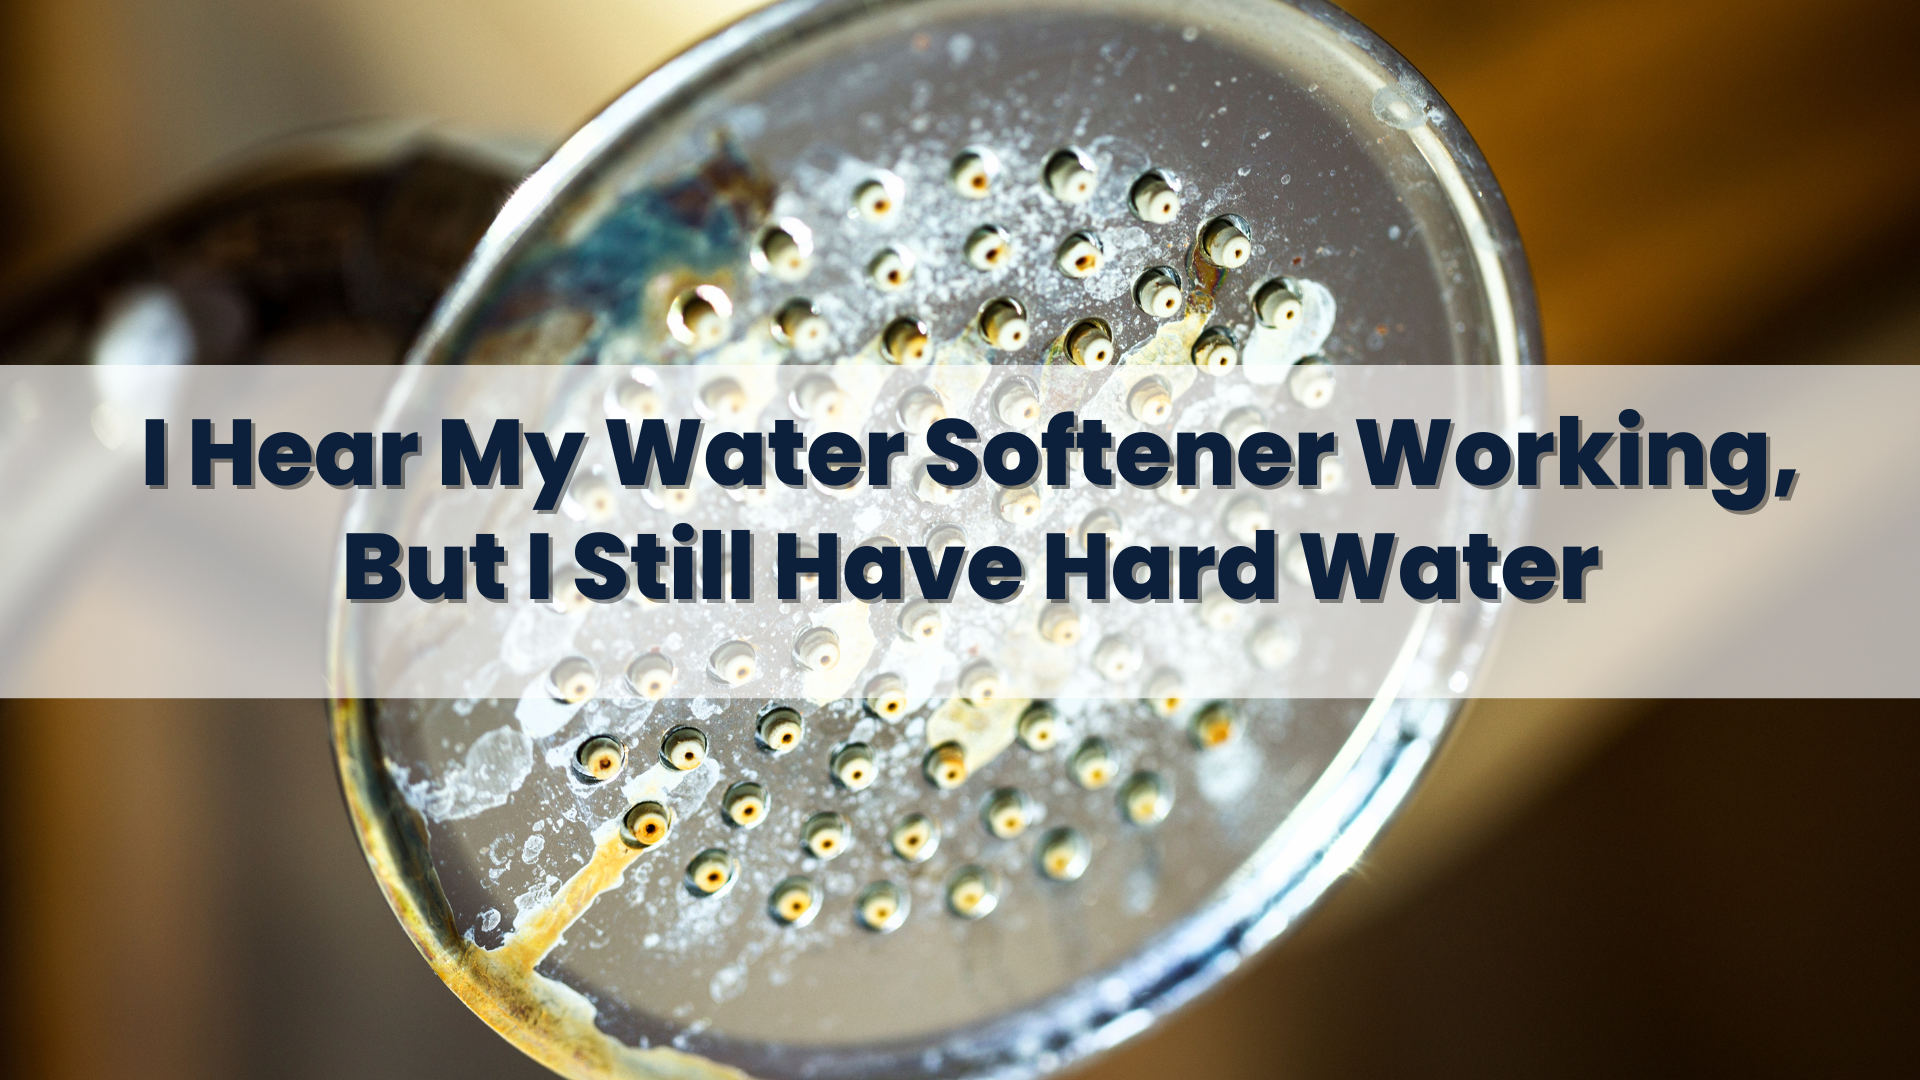 I Hear My Water Softener Working, But I Still Have Hard Water